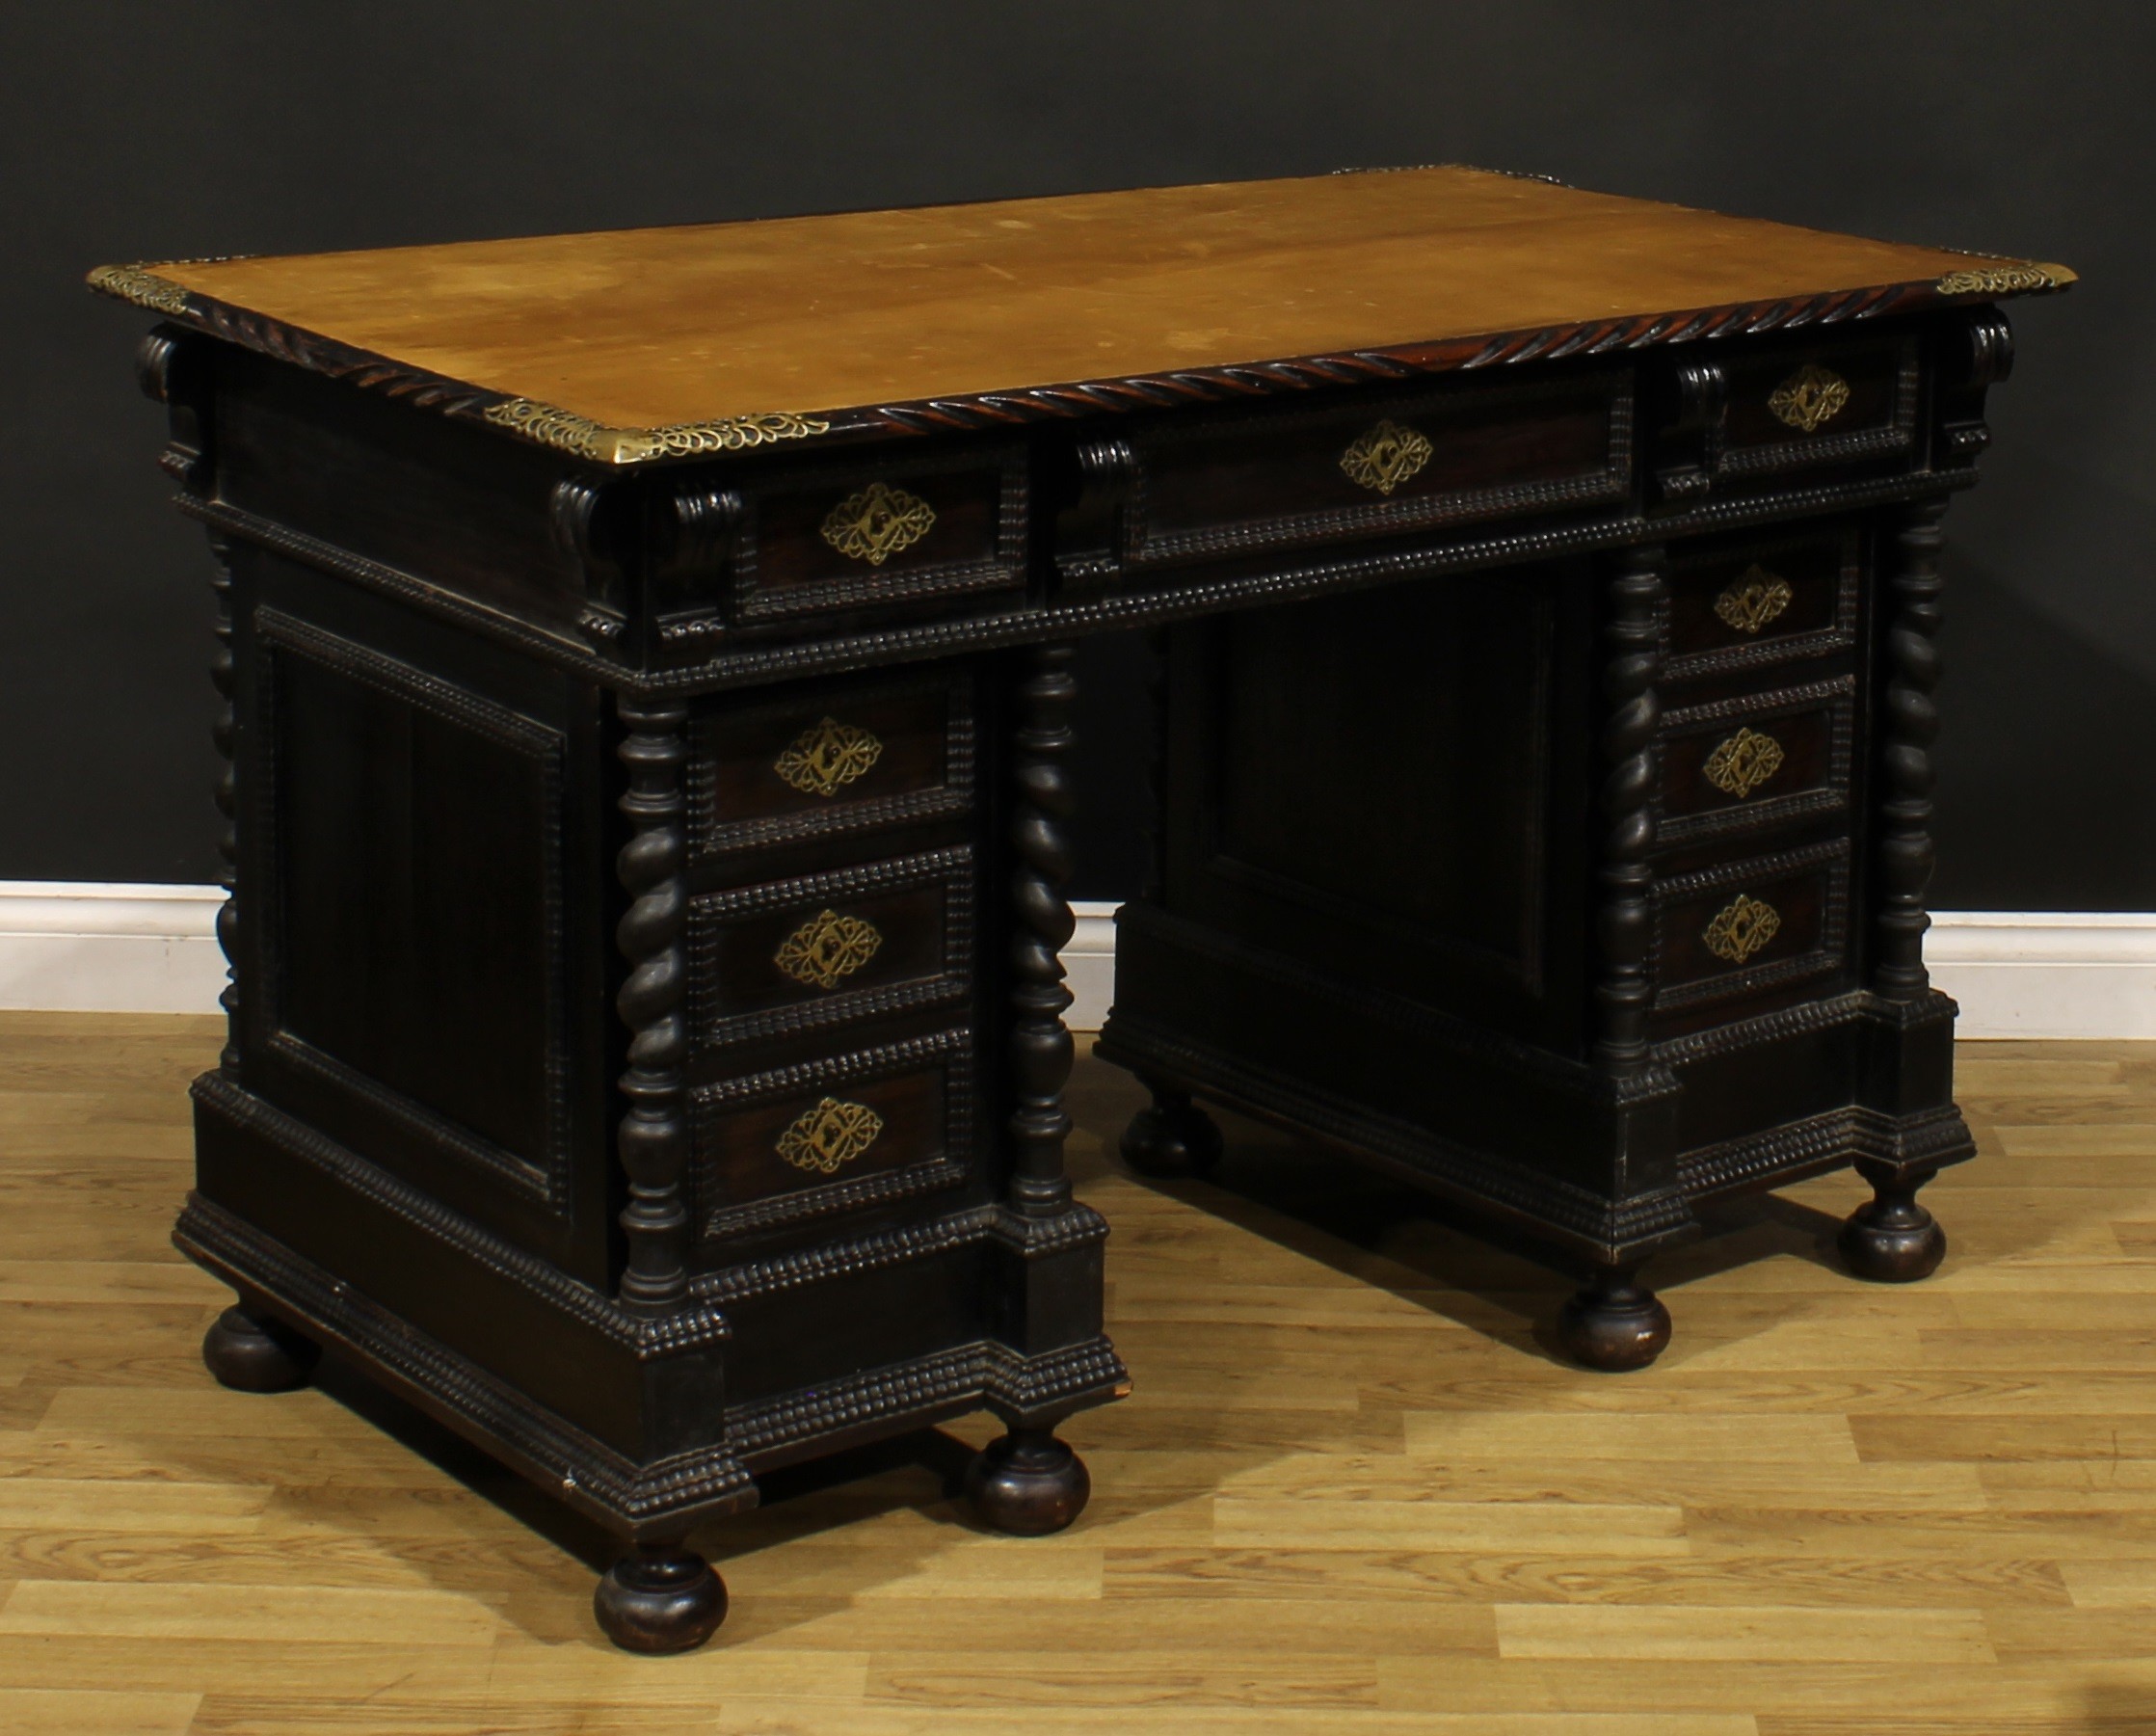 A 19th century Portuguese Baroque Revival twin pedestal desk, rectangular top with inset writing - Image 3 of 4